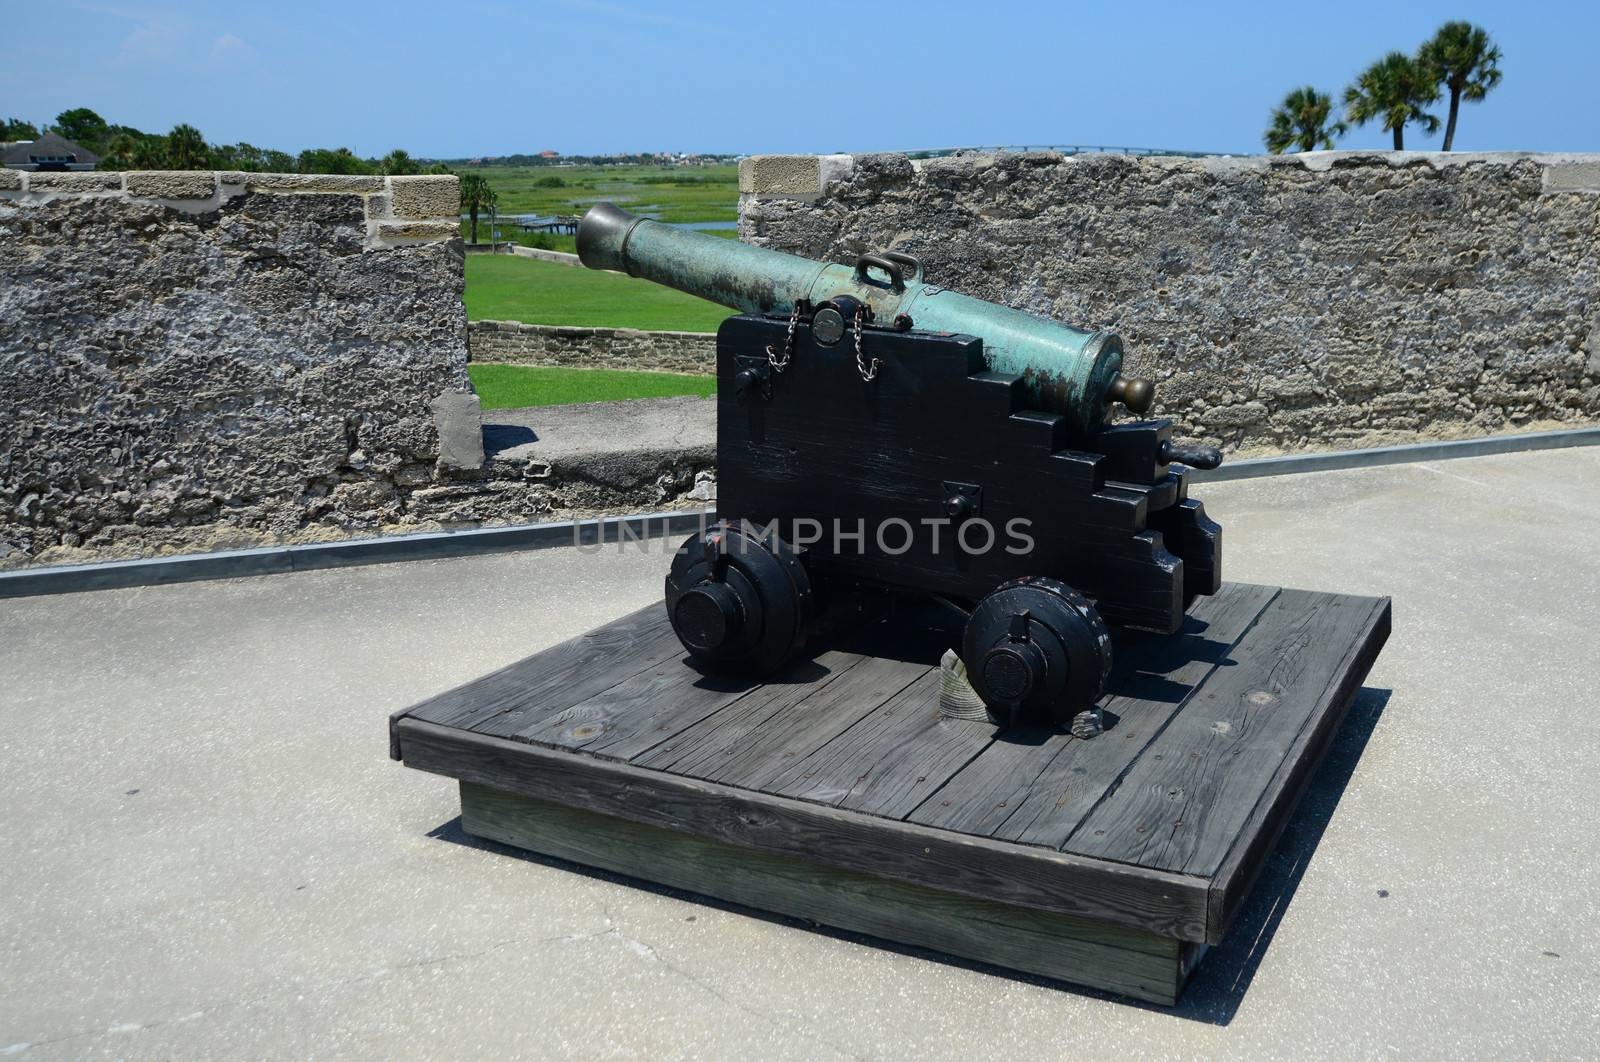 cannon by ftlaudgirl